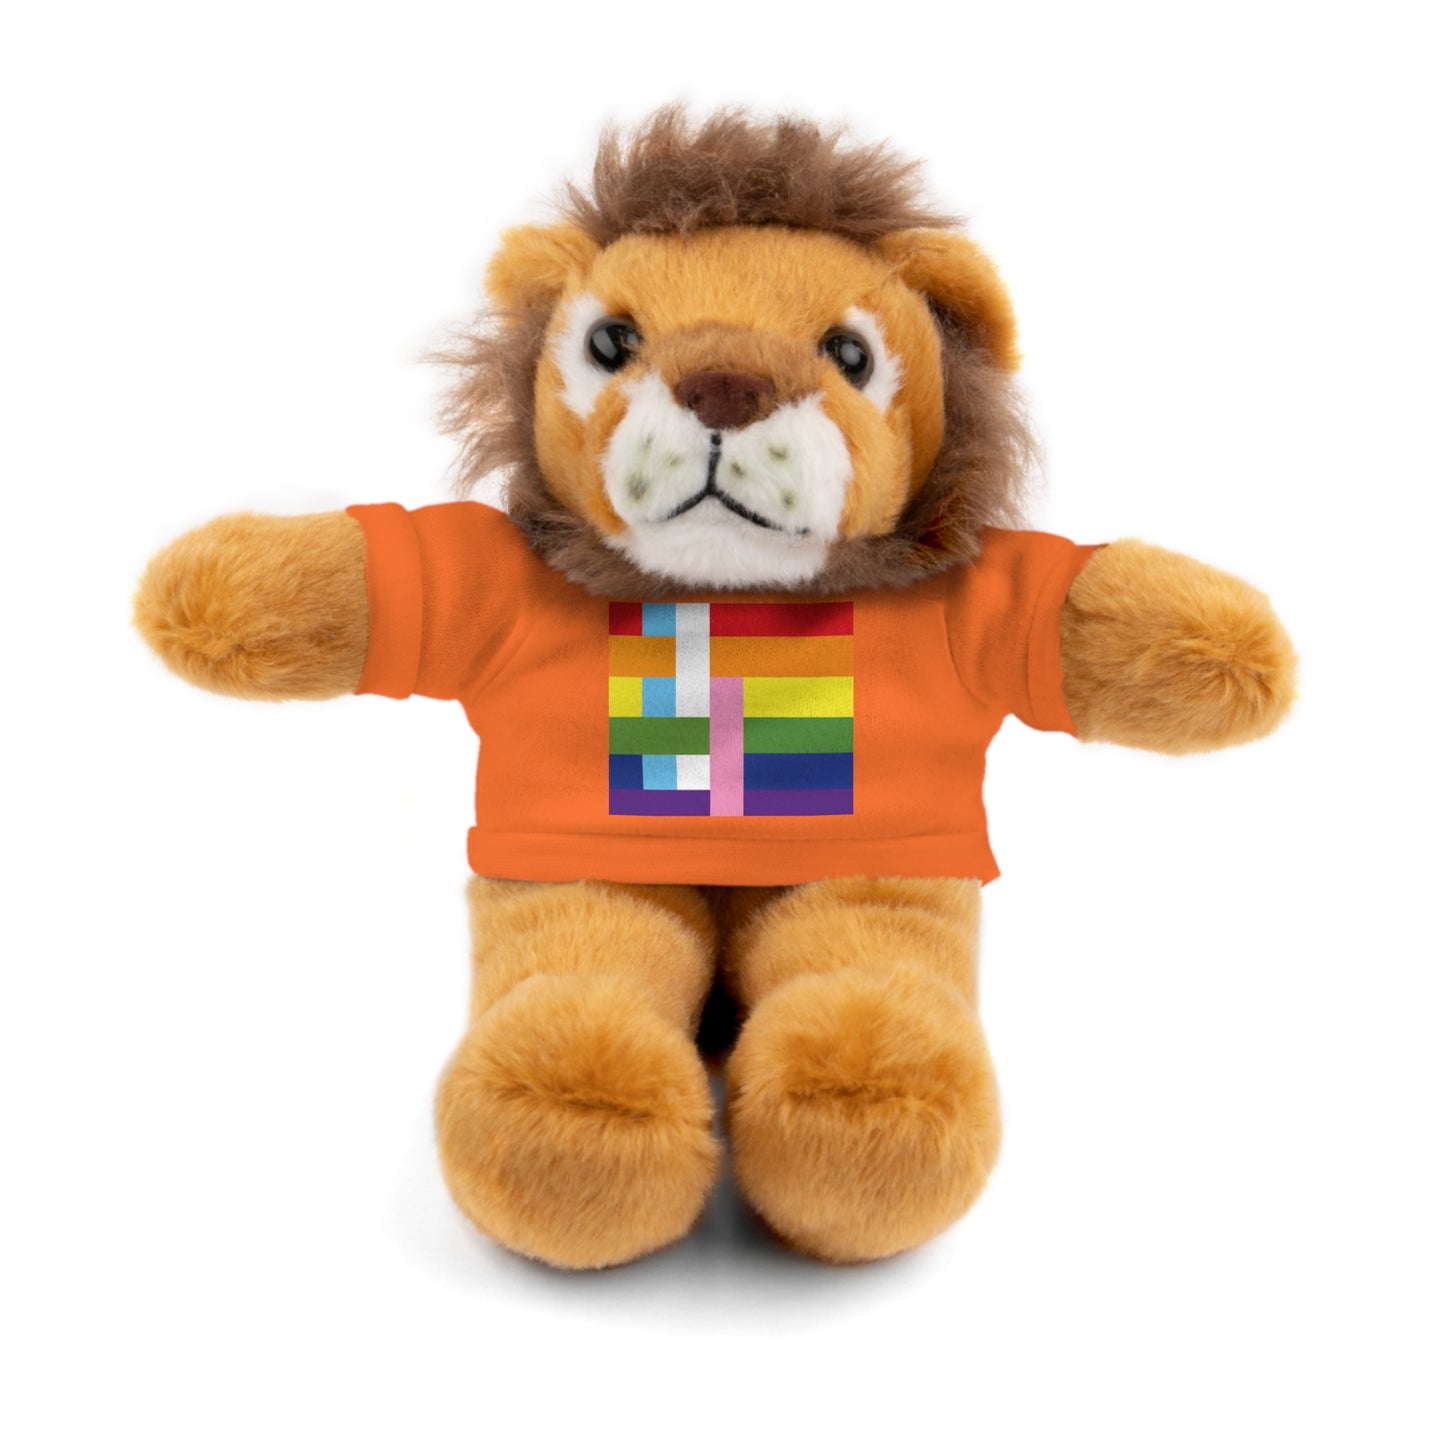 All in this together - Stuffed Animals with Tee